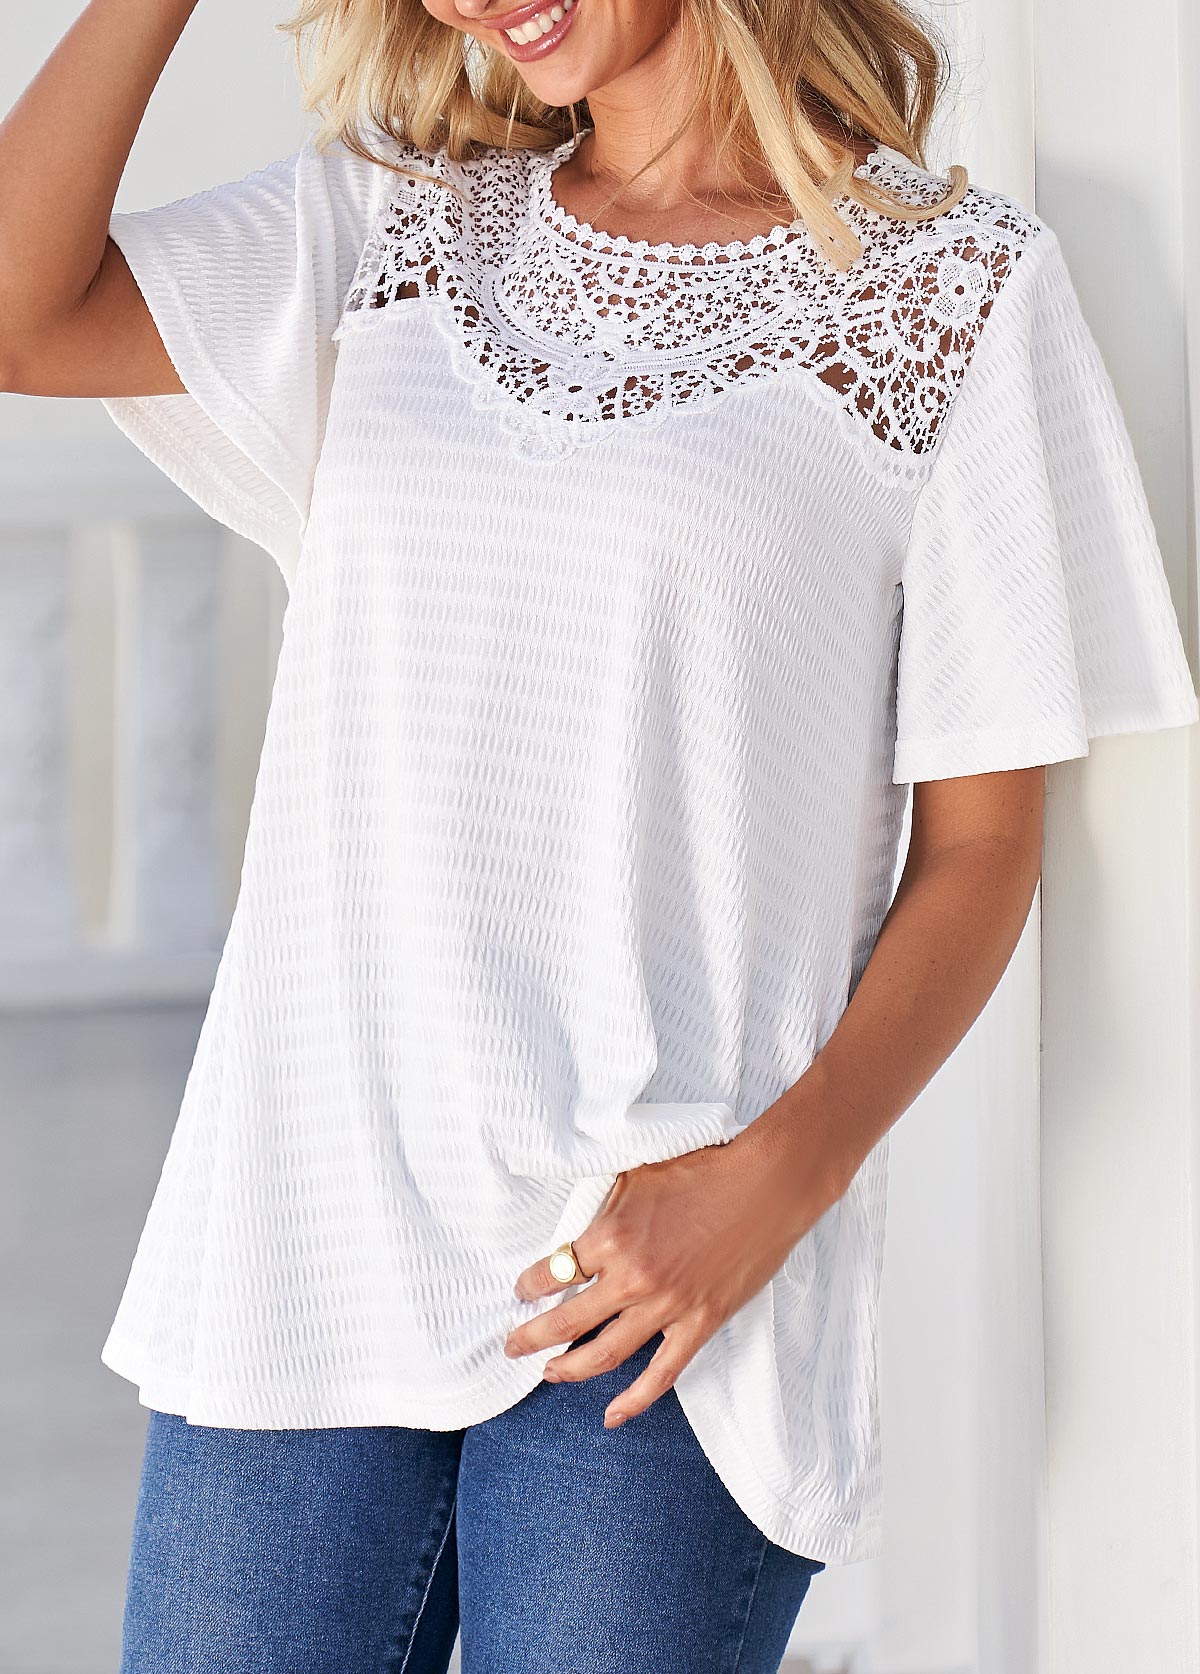 Lace Patchwork Short Sleeve White T Shirt